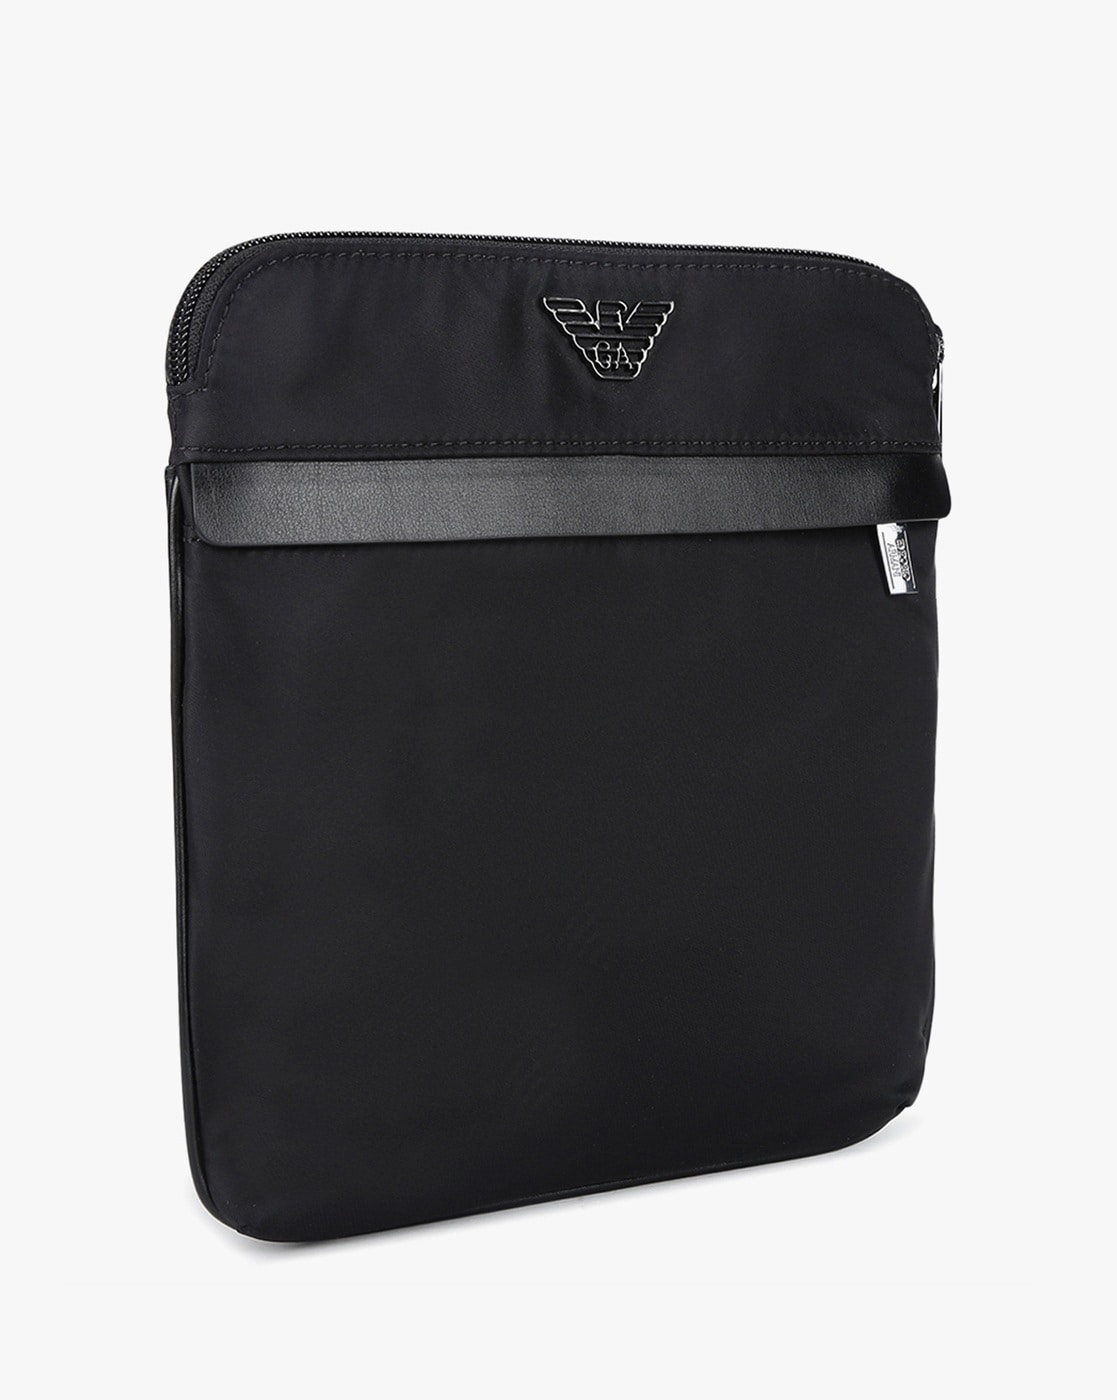 Emporio Armani Bags for men - Buy now at Boozt.com